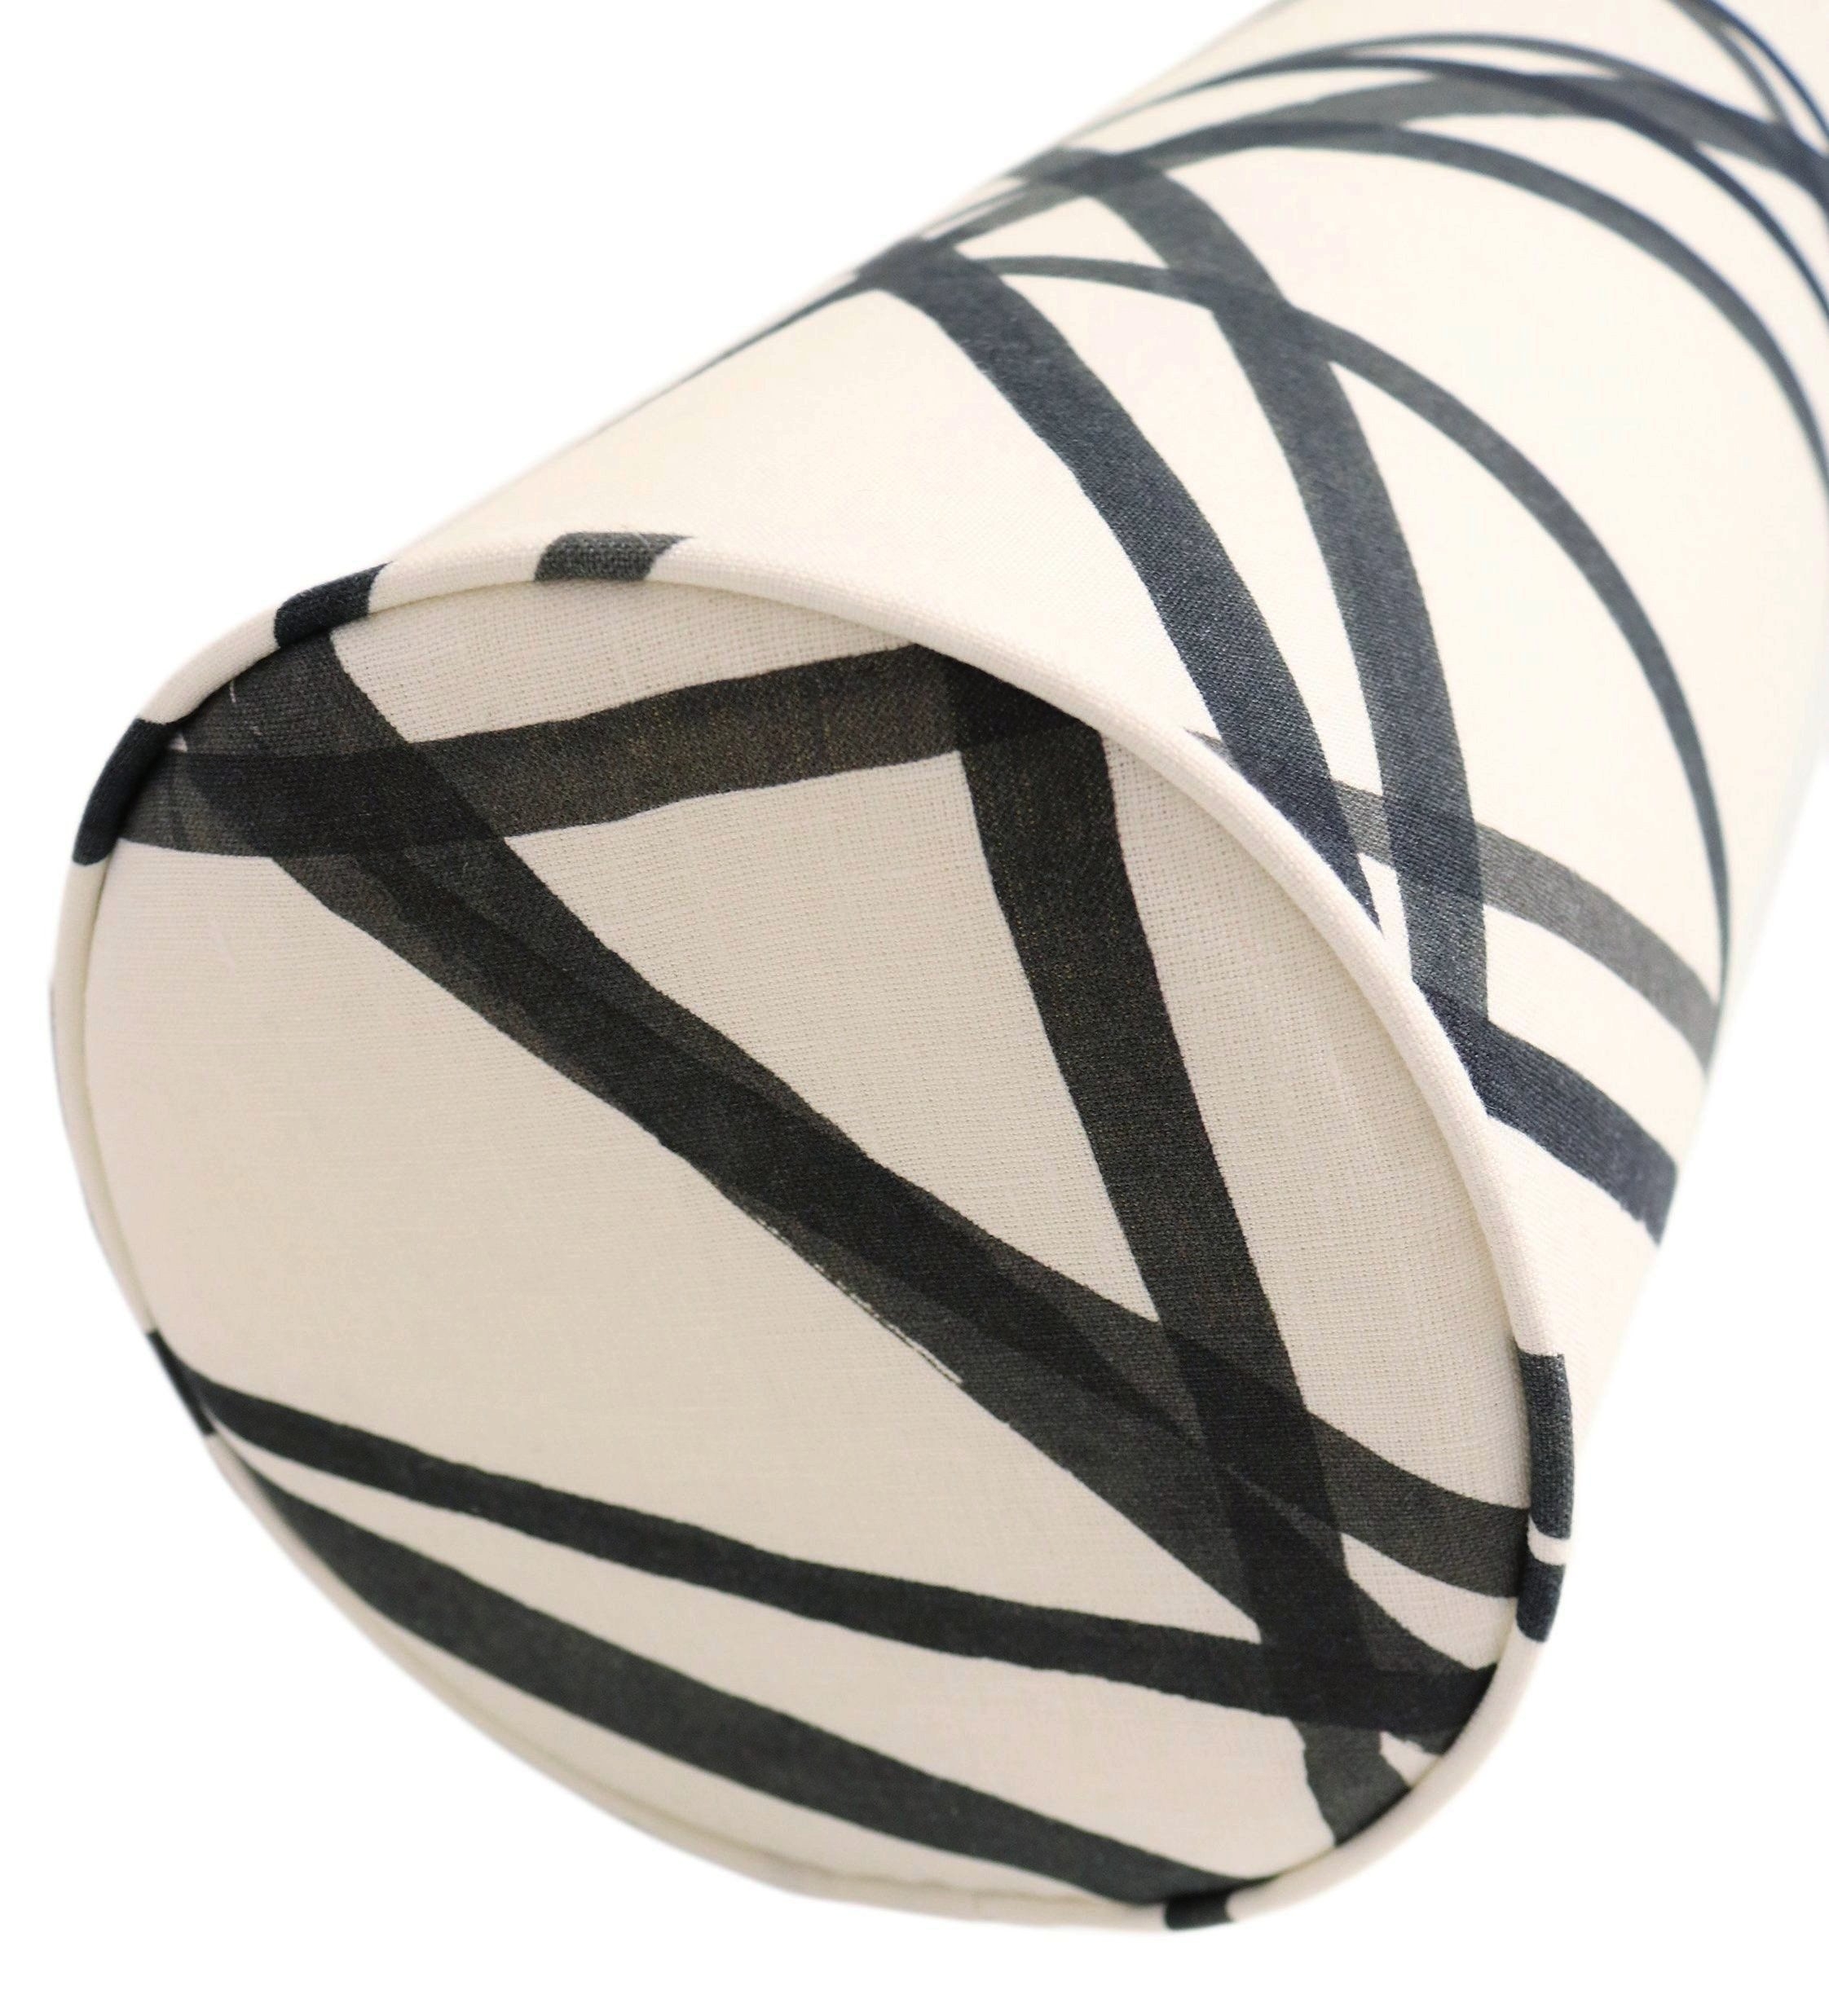 THE BOLSTER :: CHANNELS // EBONY + IVORY - QUEEN // 9" X 36" - Image 2